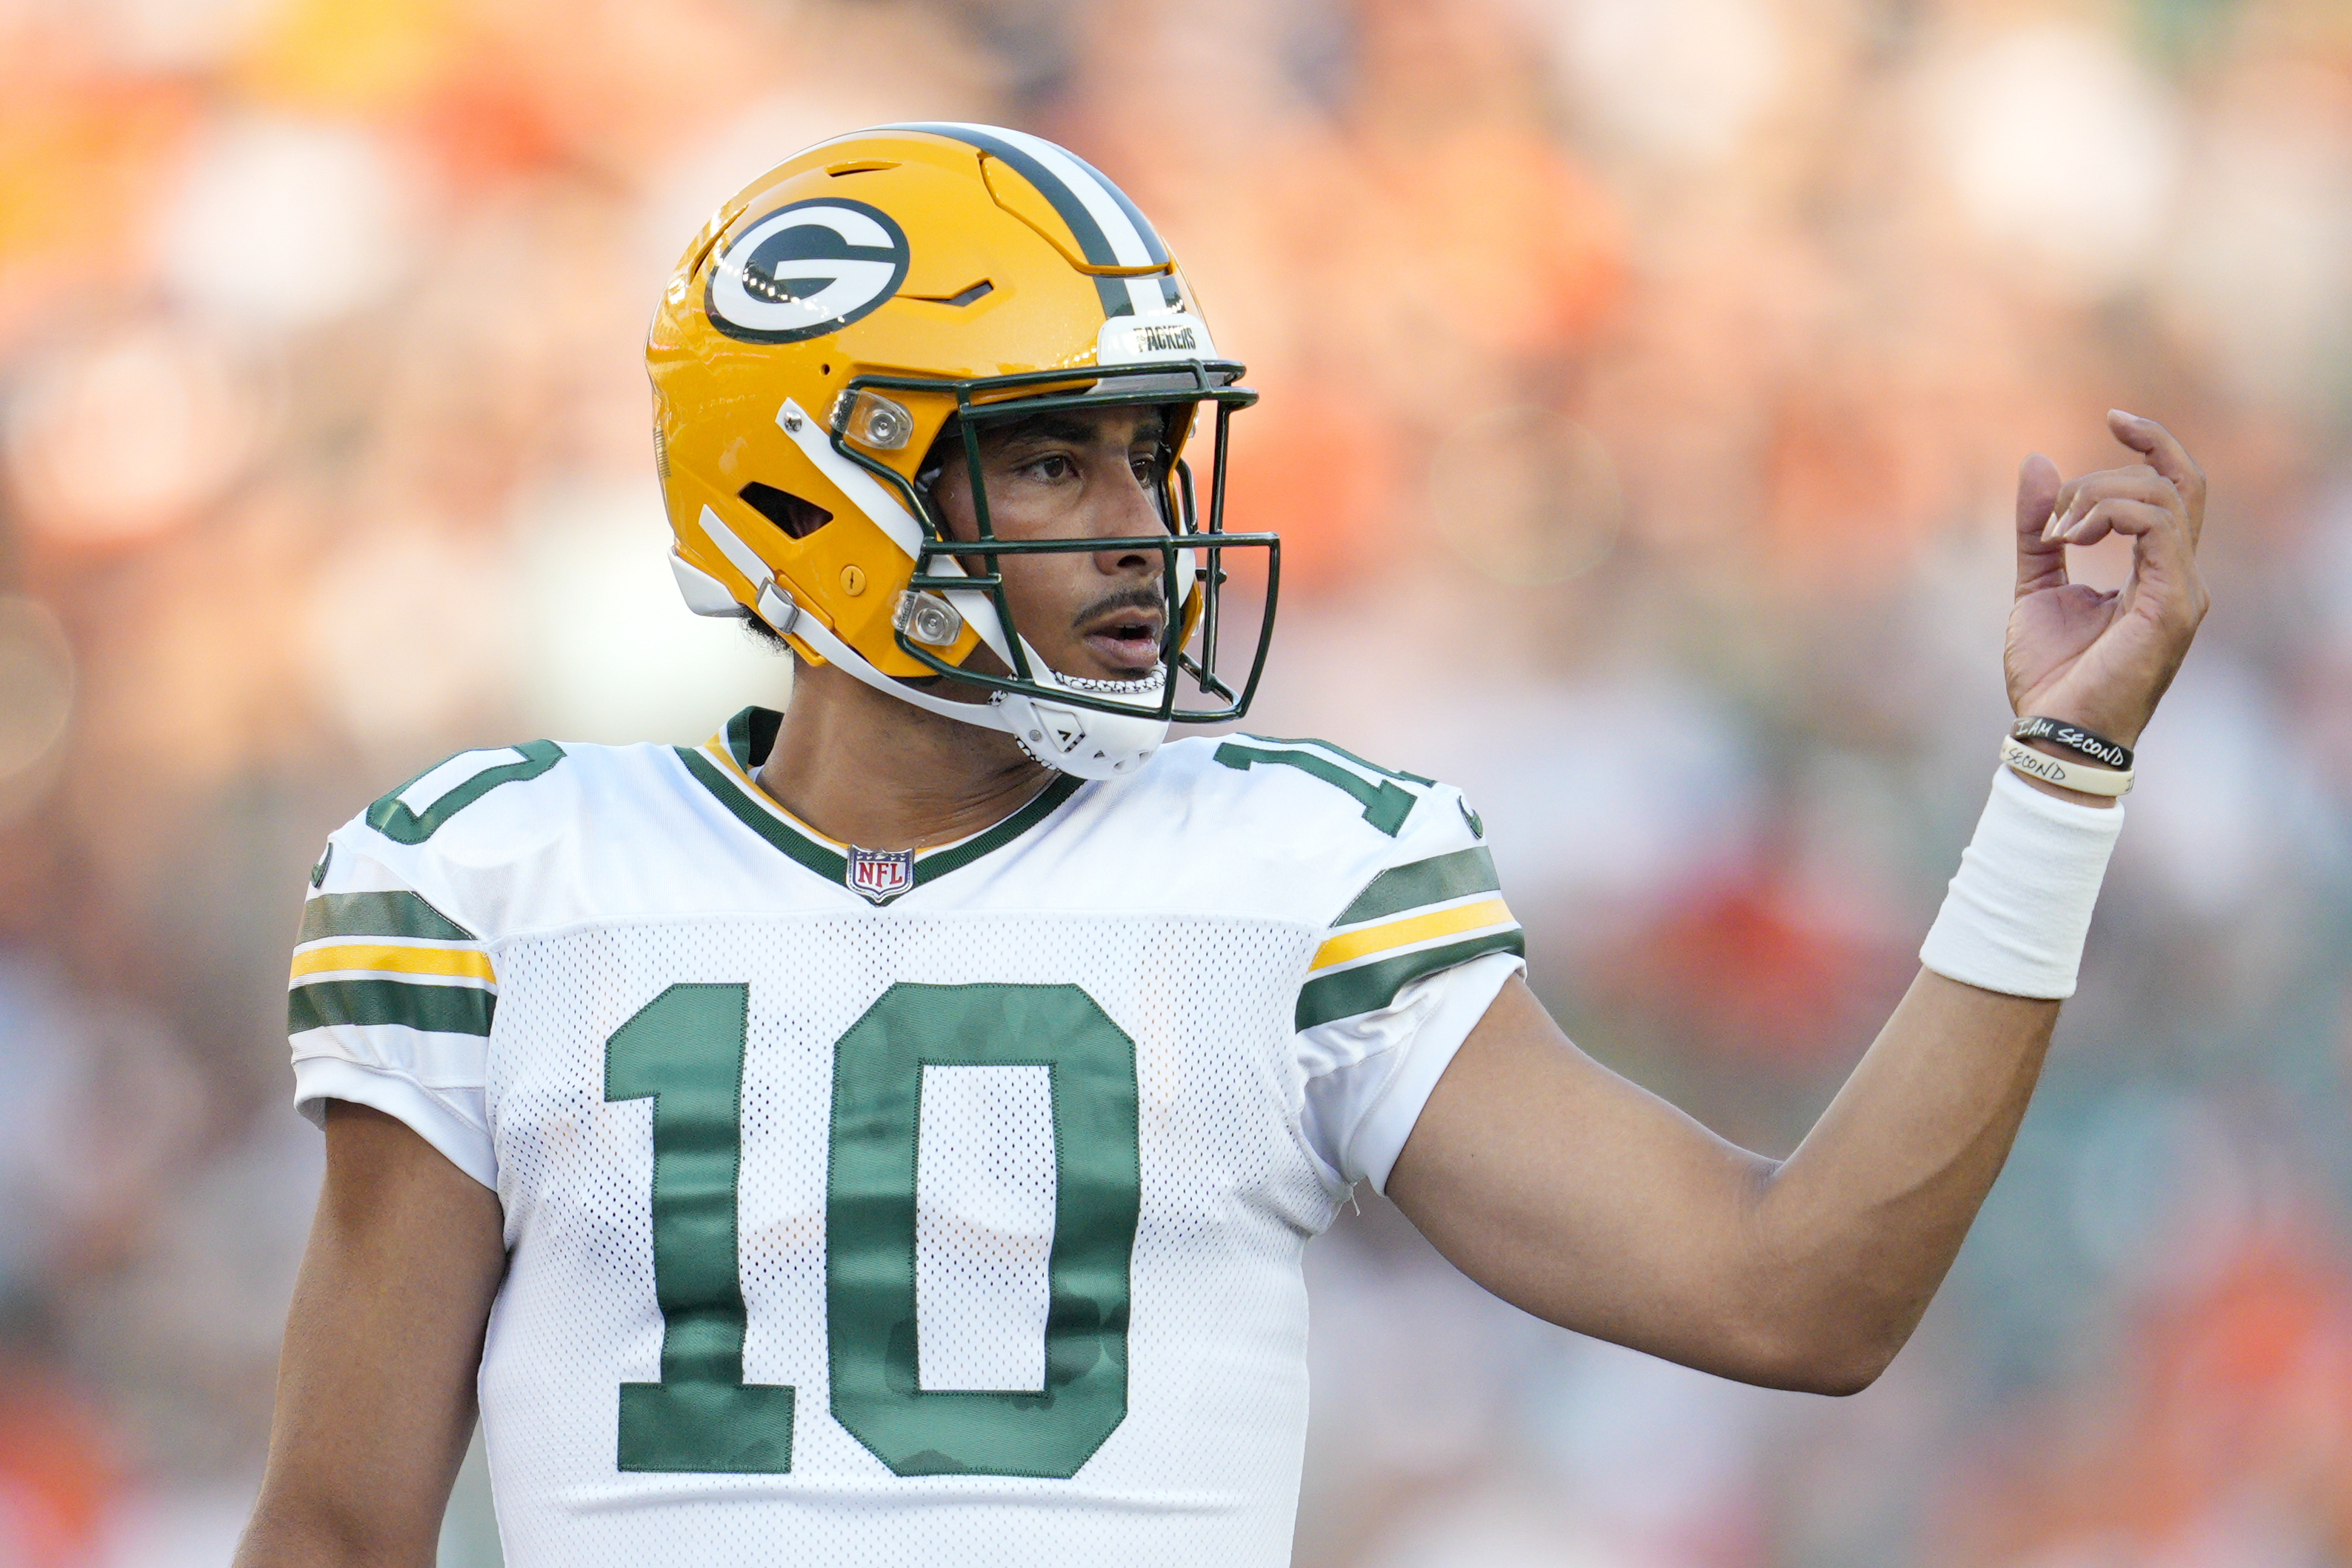 Green Bay Packers-Bears channel; time, TV schedule, streaming, odds